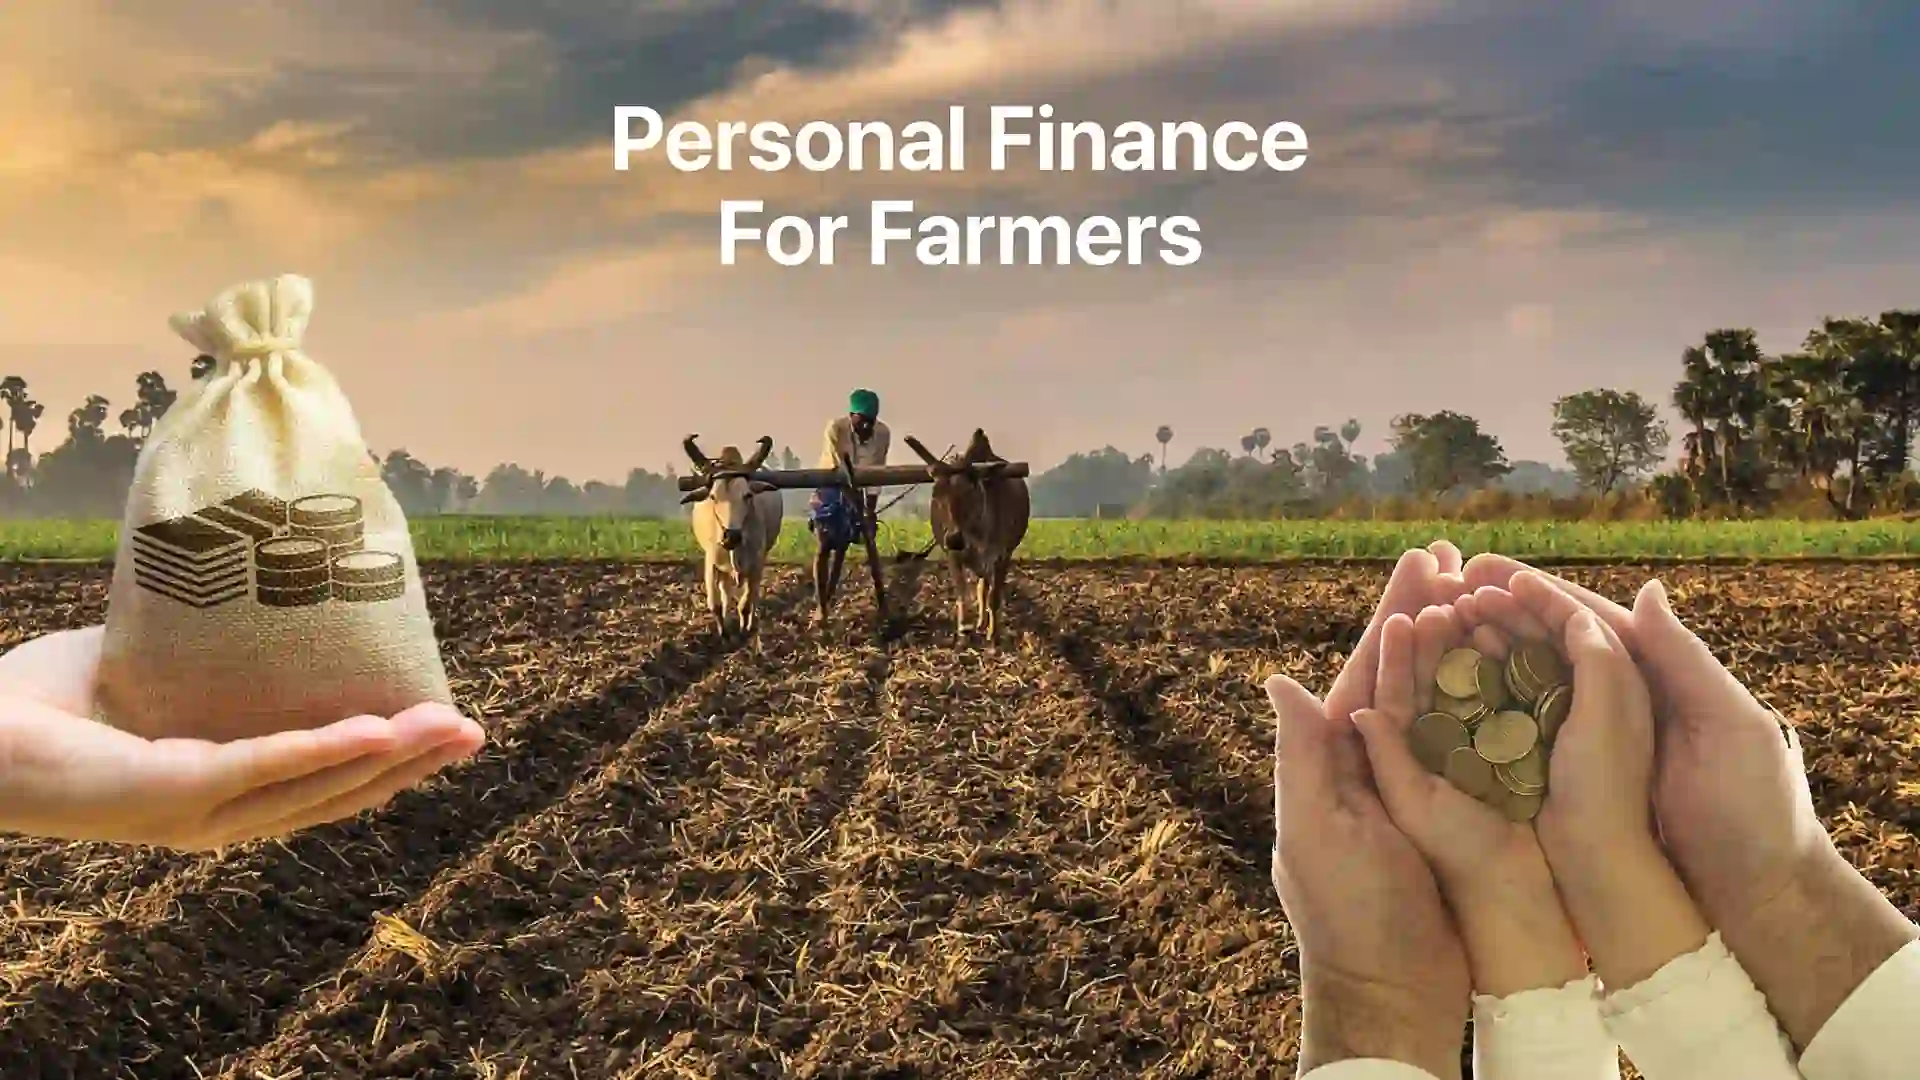 A guide to Personal Finance for Farmers - Online course on ffreedom app